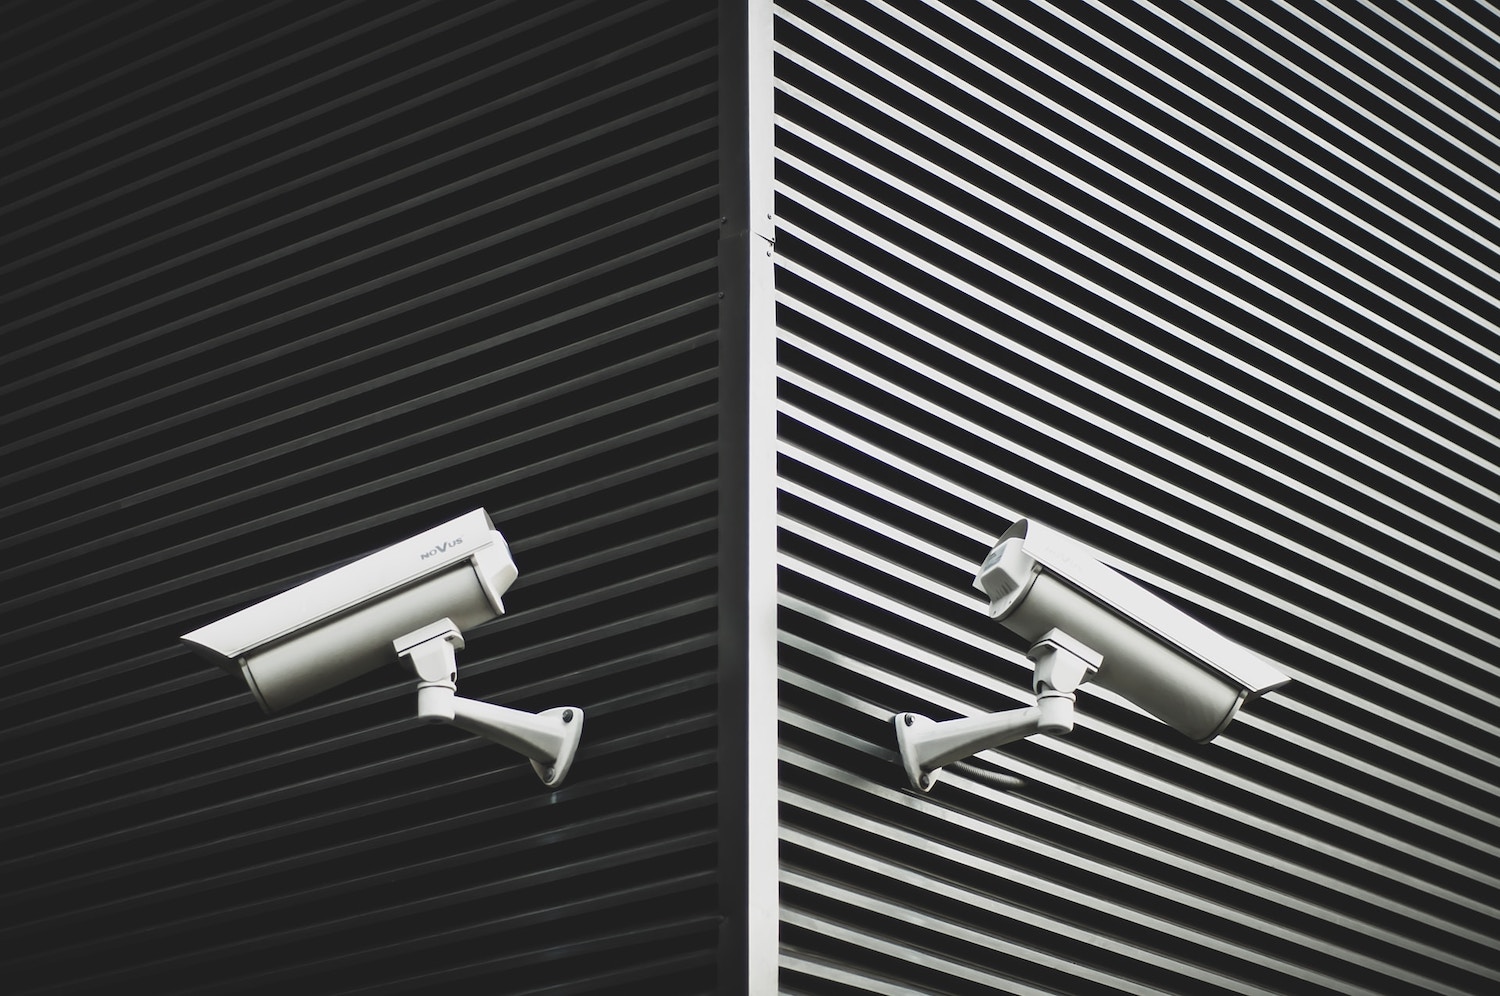 #4 commercial security trends to consider in your company’s strategy 